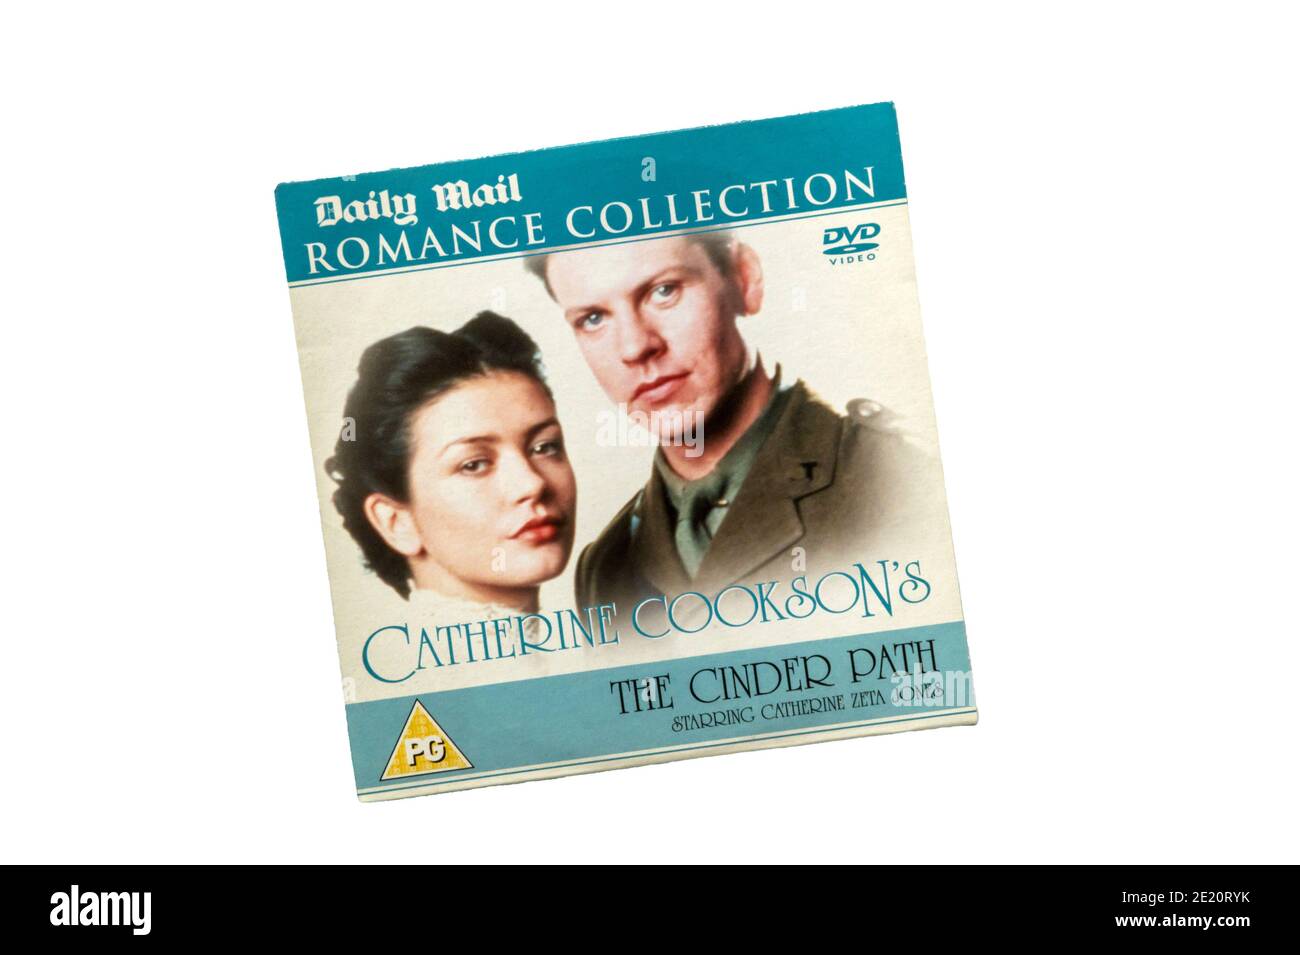 A copy of The Cinder Path by Catherine Cookson, given away free with the Daily Mail newspaper. Stock Photo